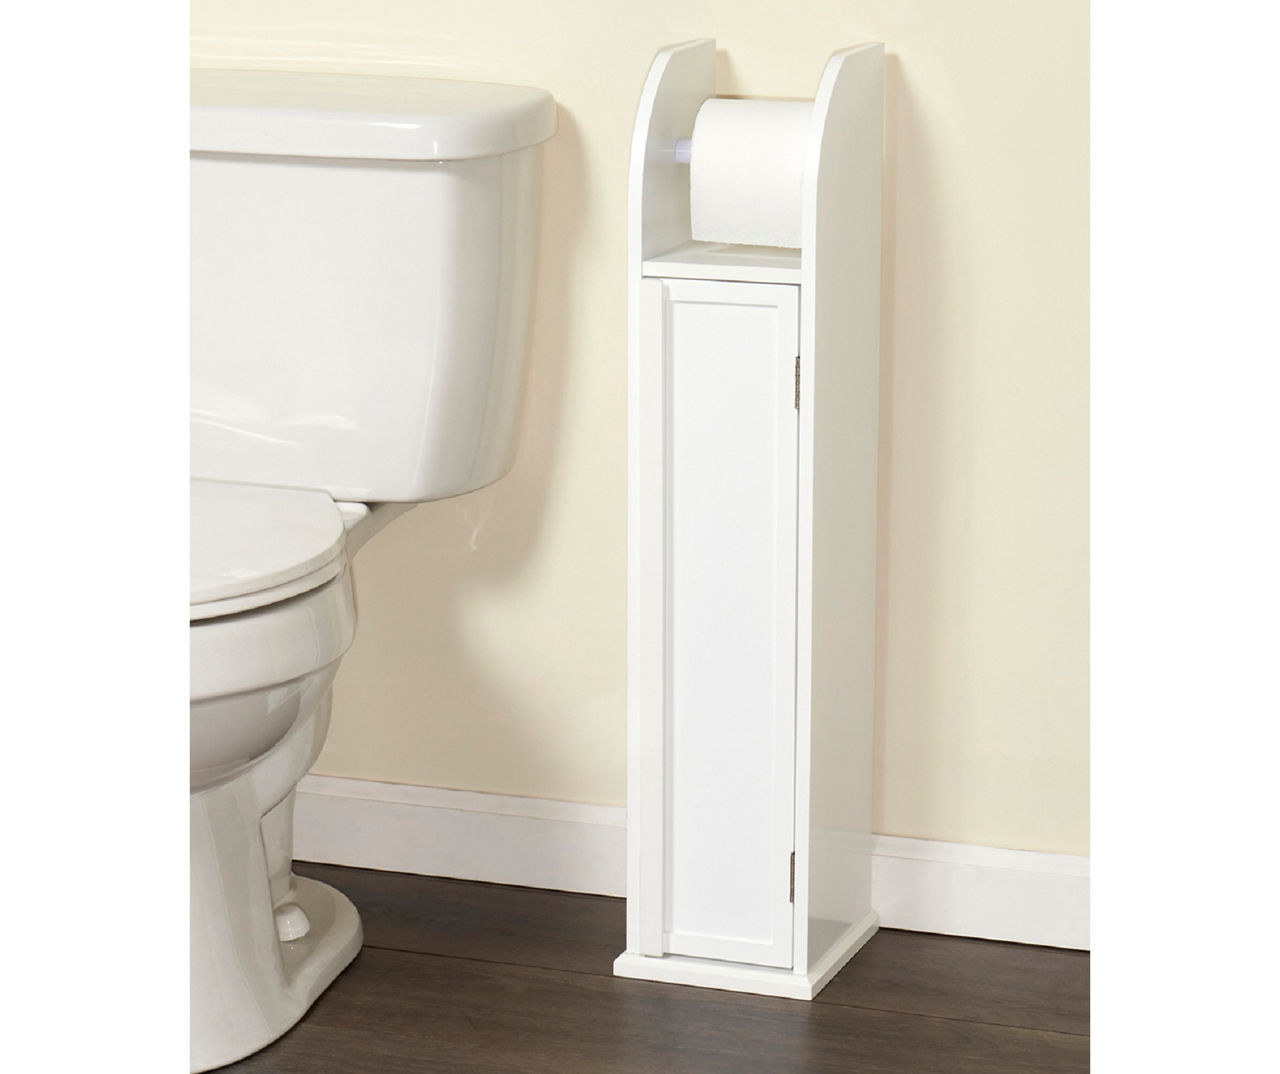 2-in-1 Toilet Roll Holder and Storage Unit Cabinet in White